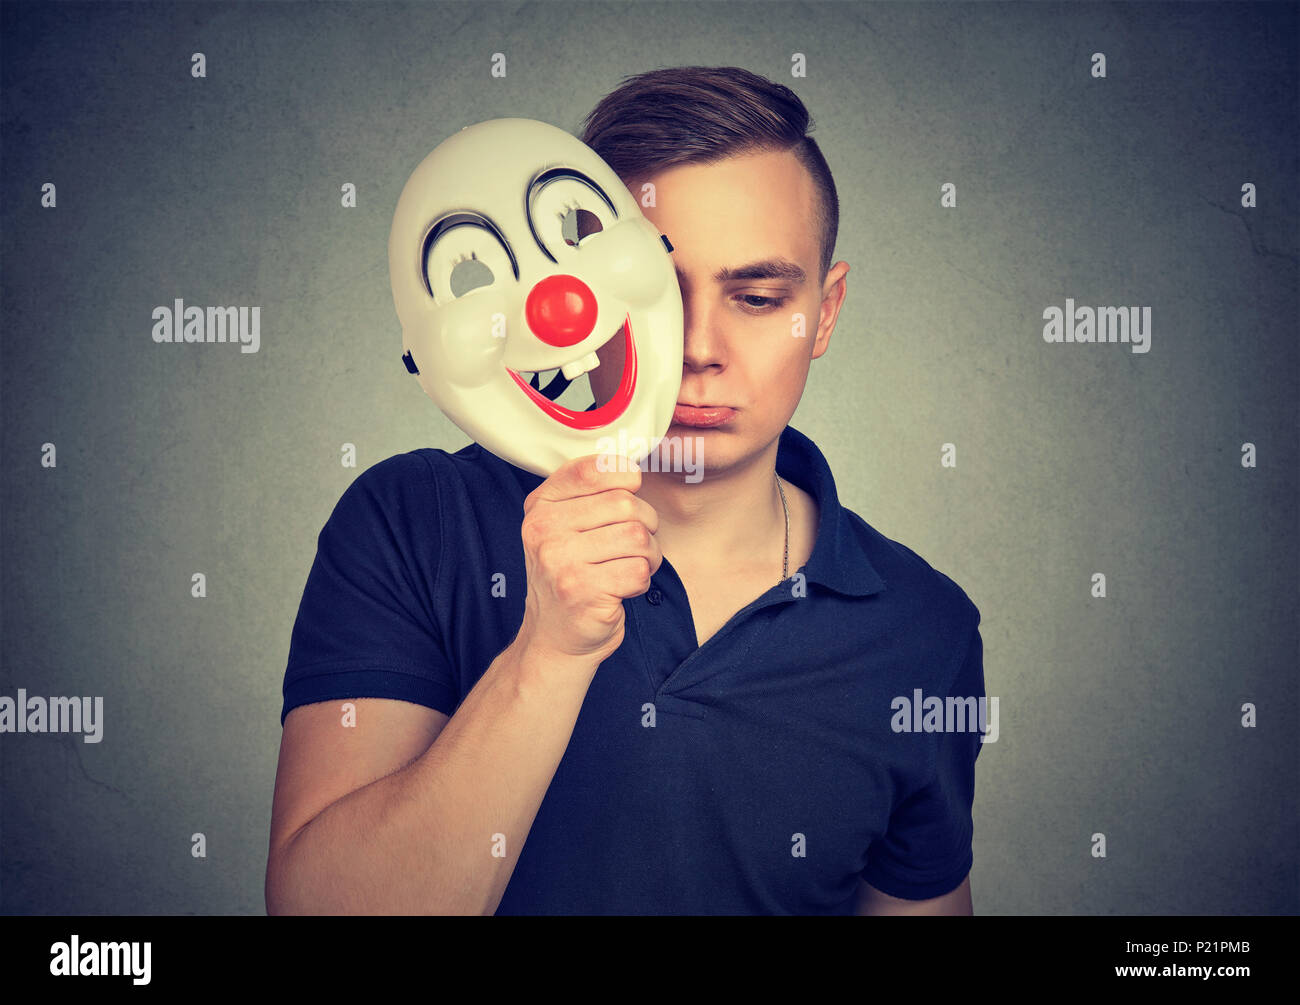 Sad and depressed man covering face with happy clown mask hiding his personality. Stock Photo